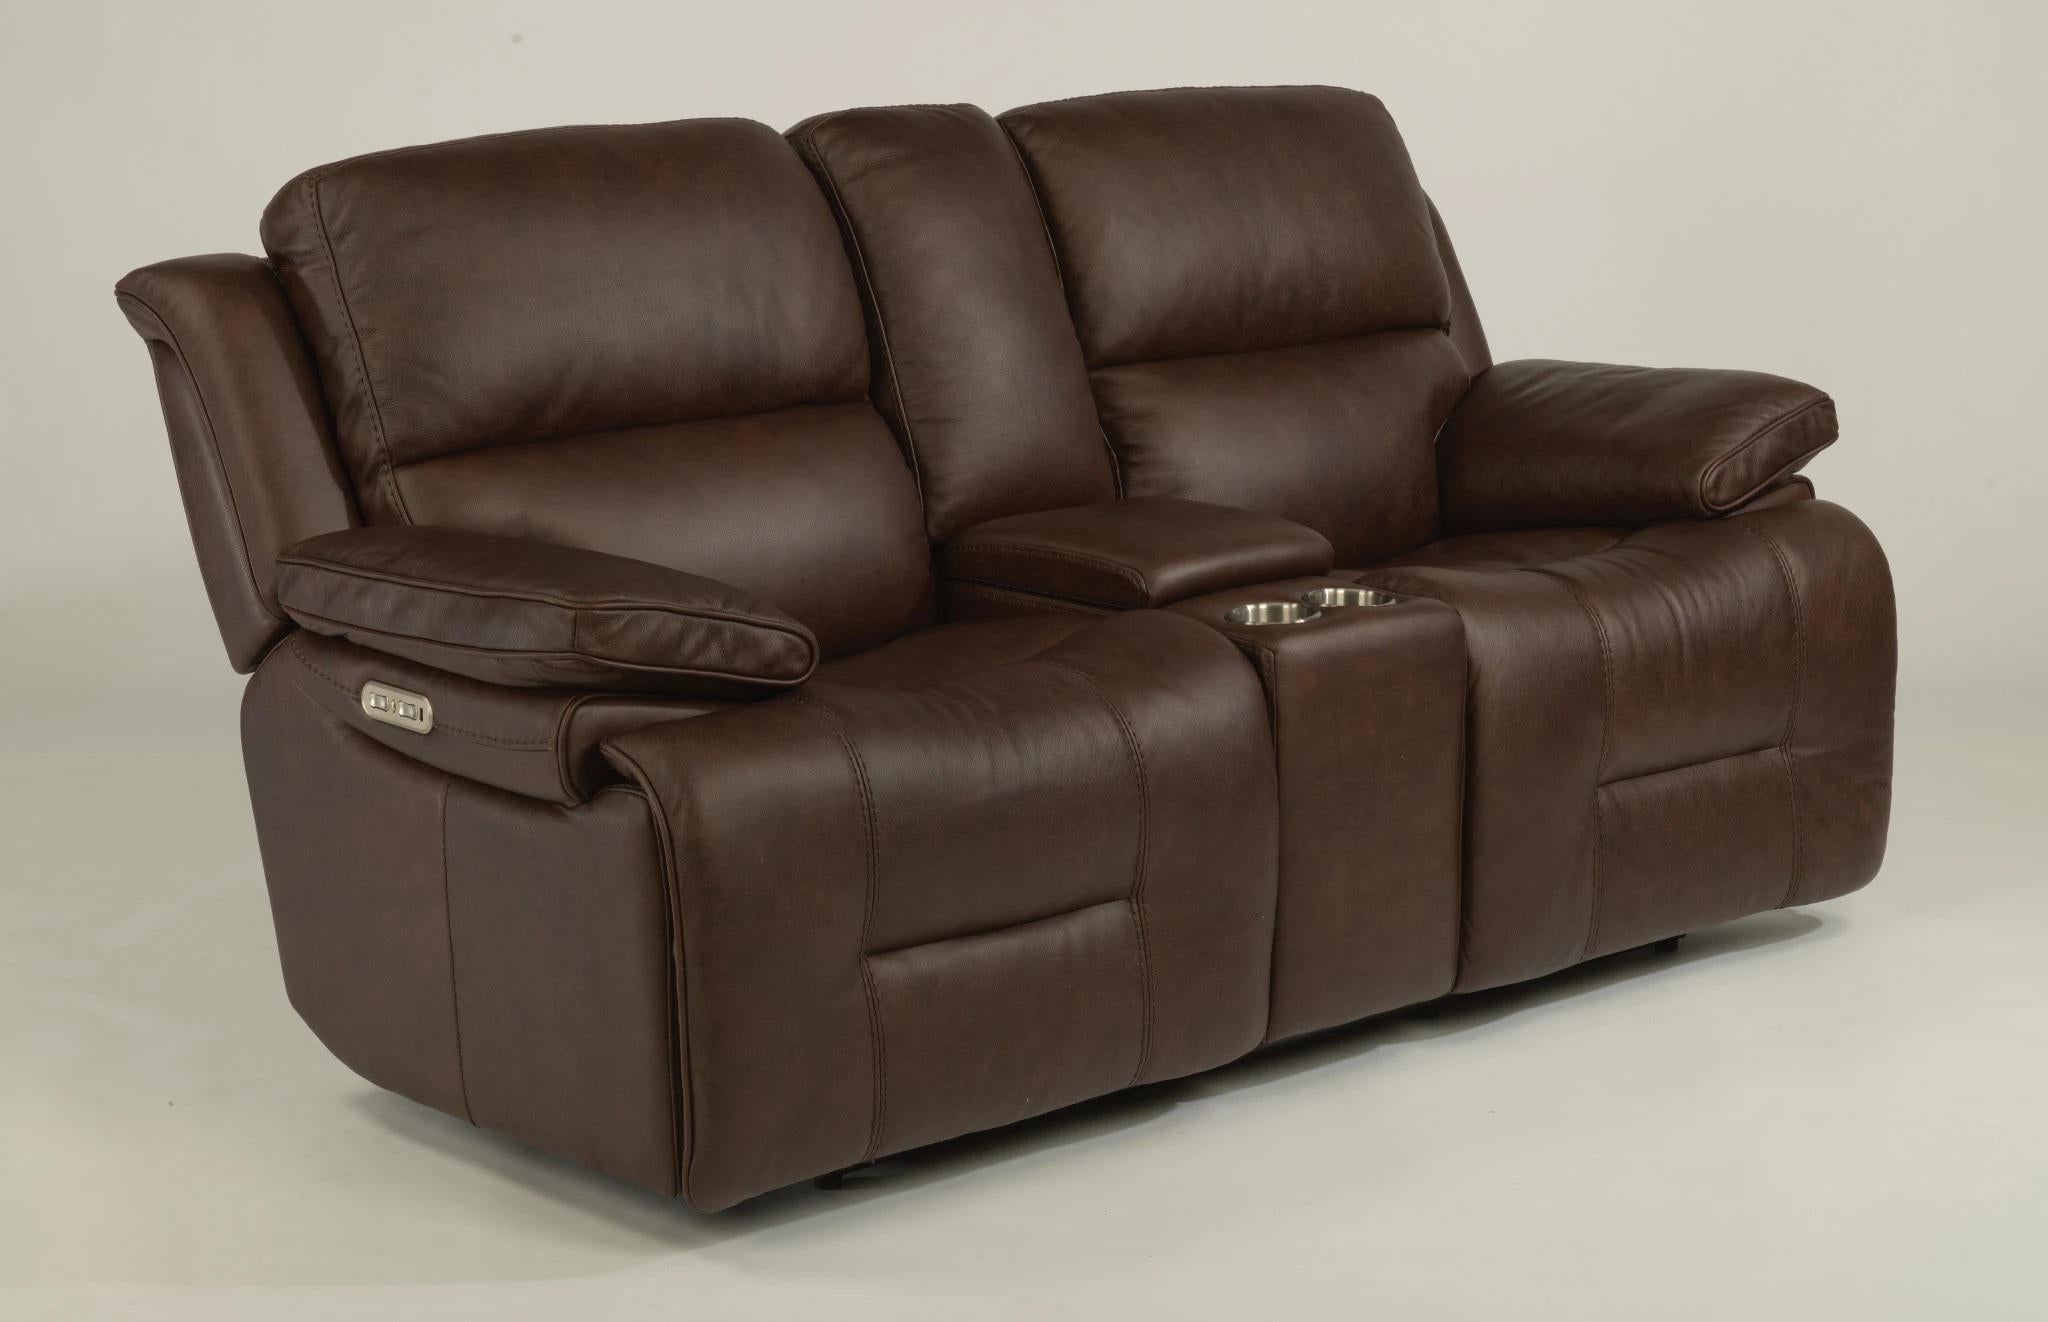 Flexsteel Latitudes Apollo Leather Power Reclining Loveseat w/Console and Power Headrests in Brown